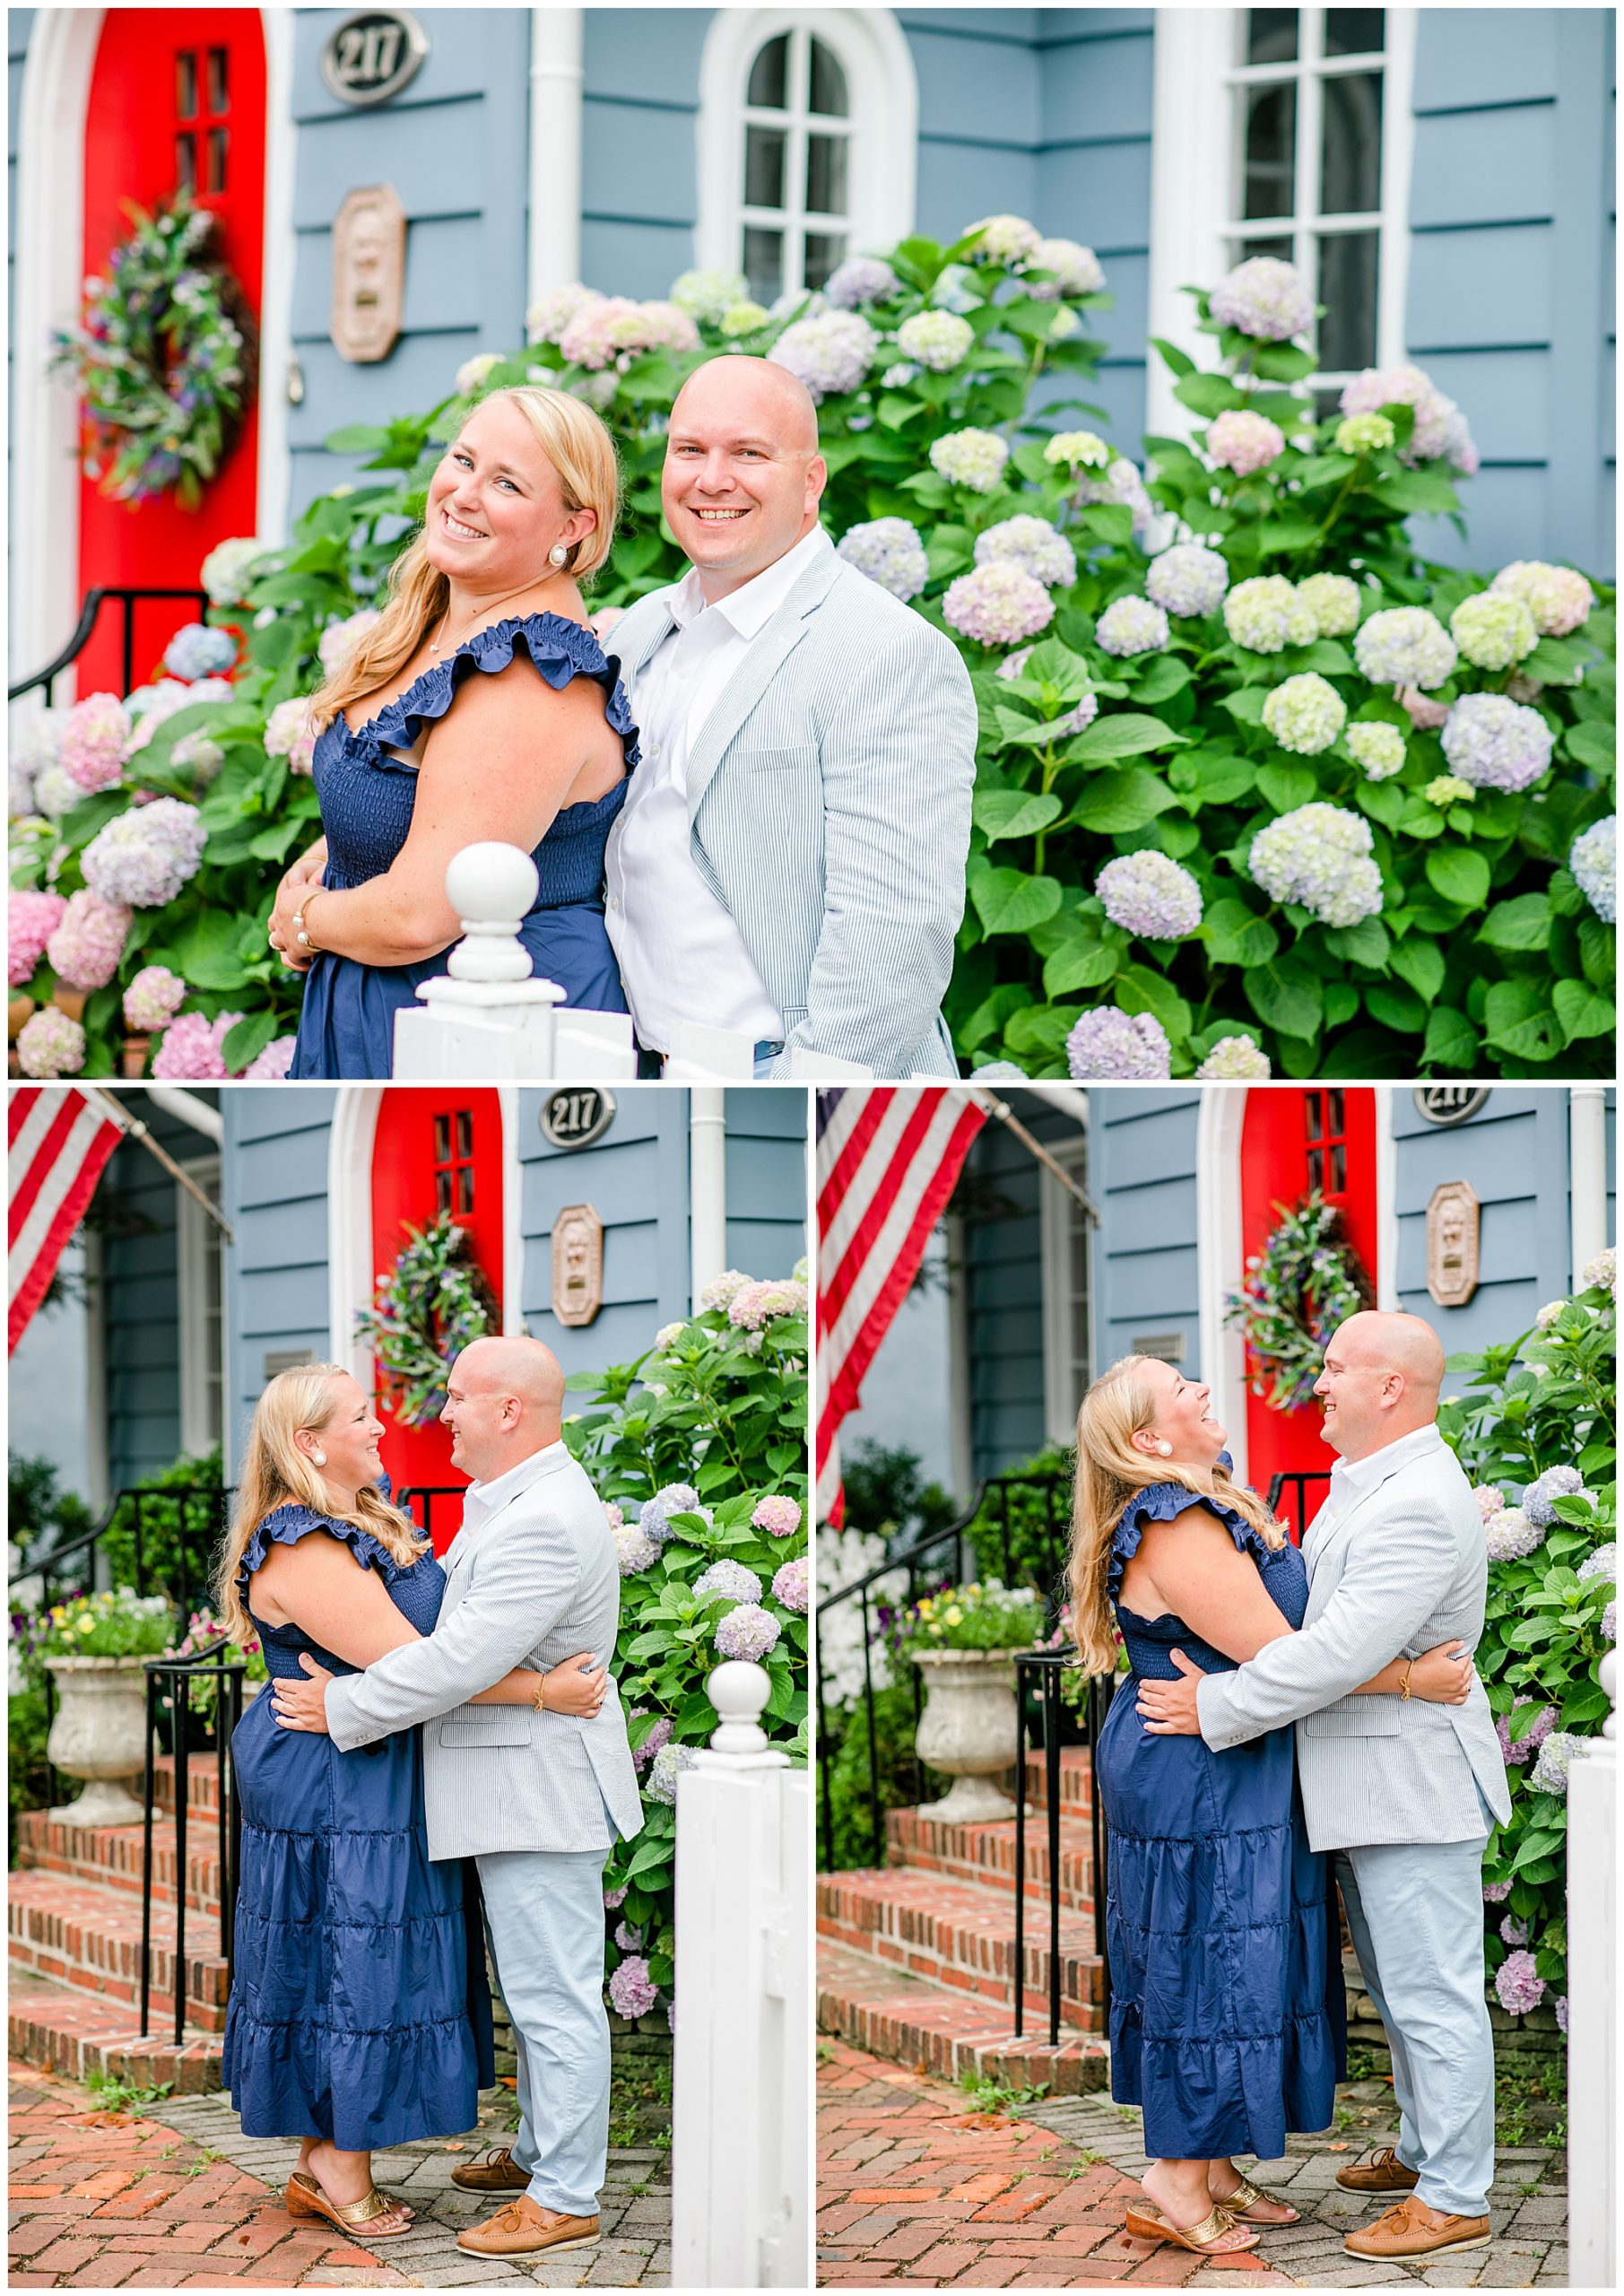 late spring Annapolis engagement photos, nautical engagement photos, Annapolis Maryland, Maryland engagement photos, MD wedding photographer, MD engagement photos, all American engagement photos, downtown Annapolis engagement photos, Annapolis photographer, Rachel E.H. Photography, summer engagement photos, red white and blue aesthetic